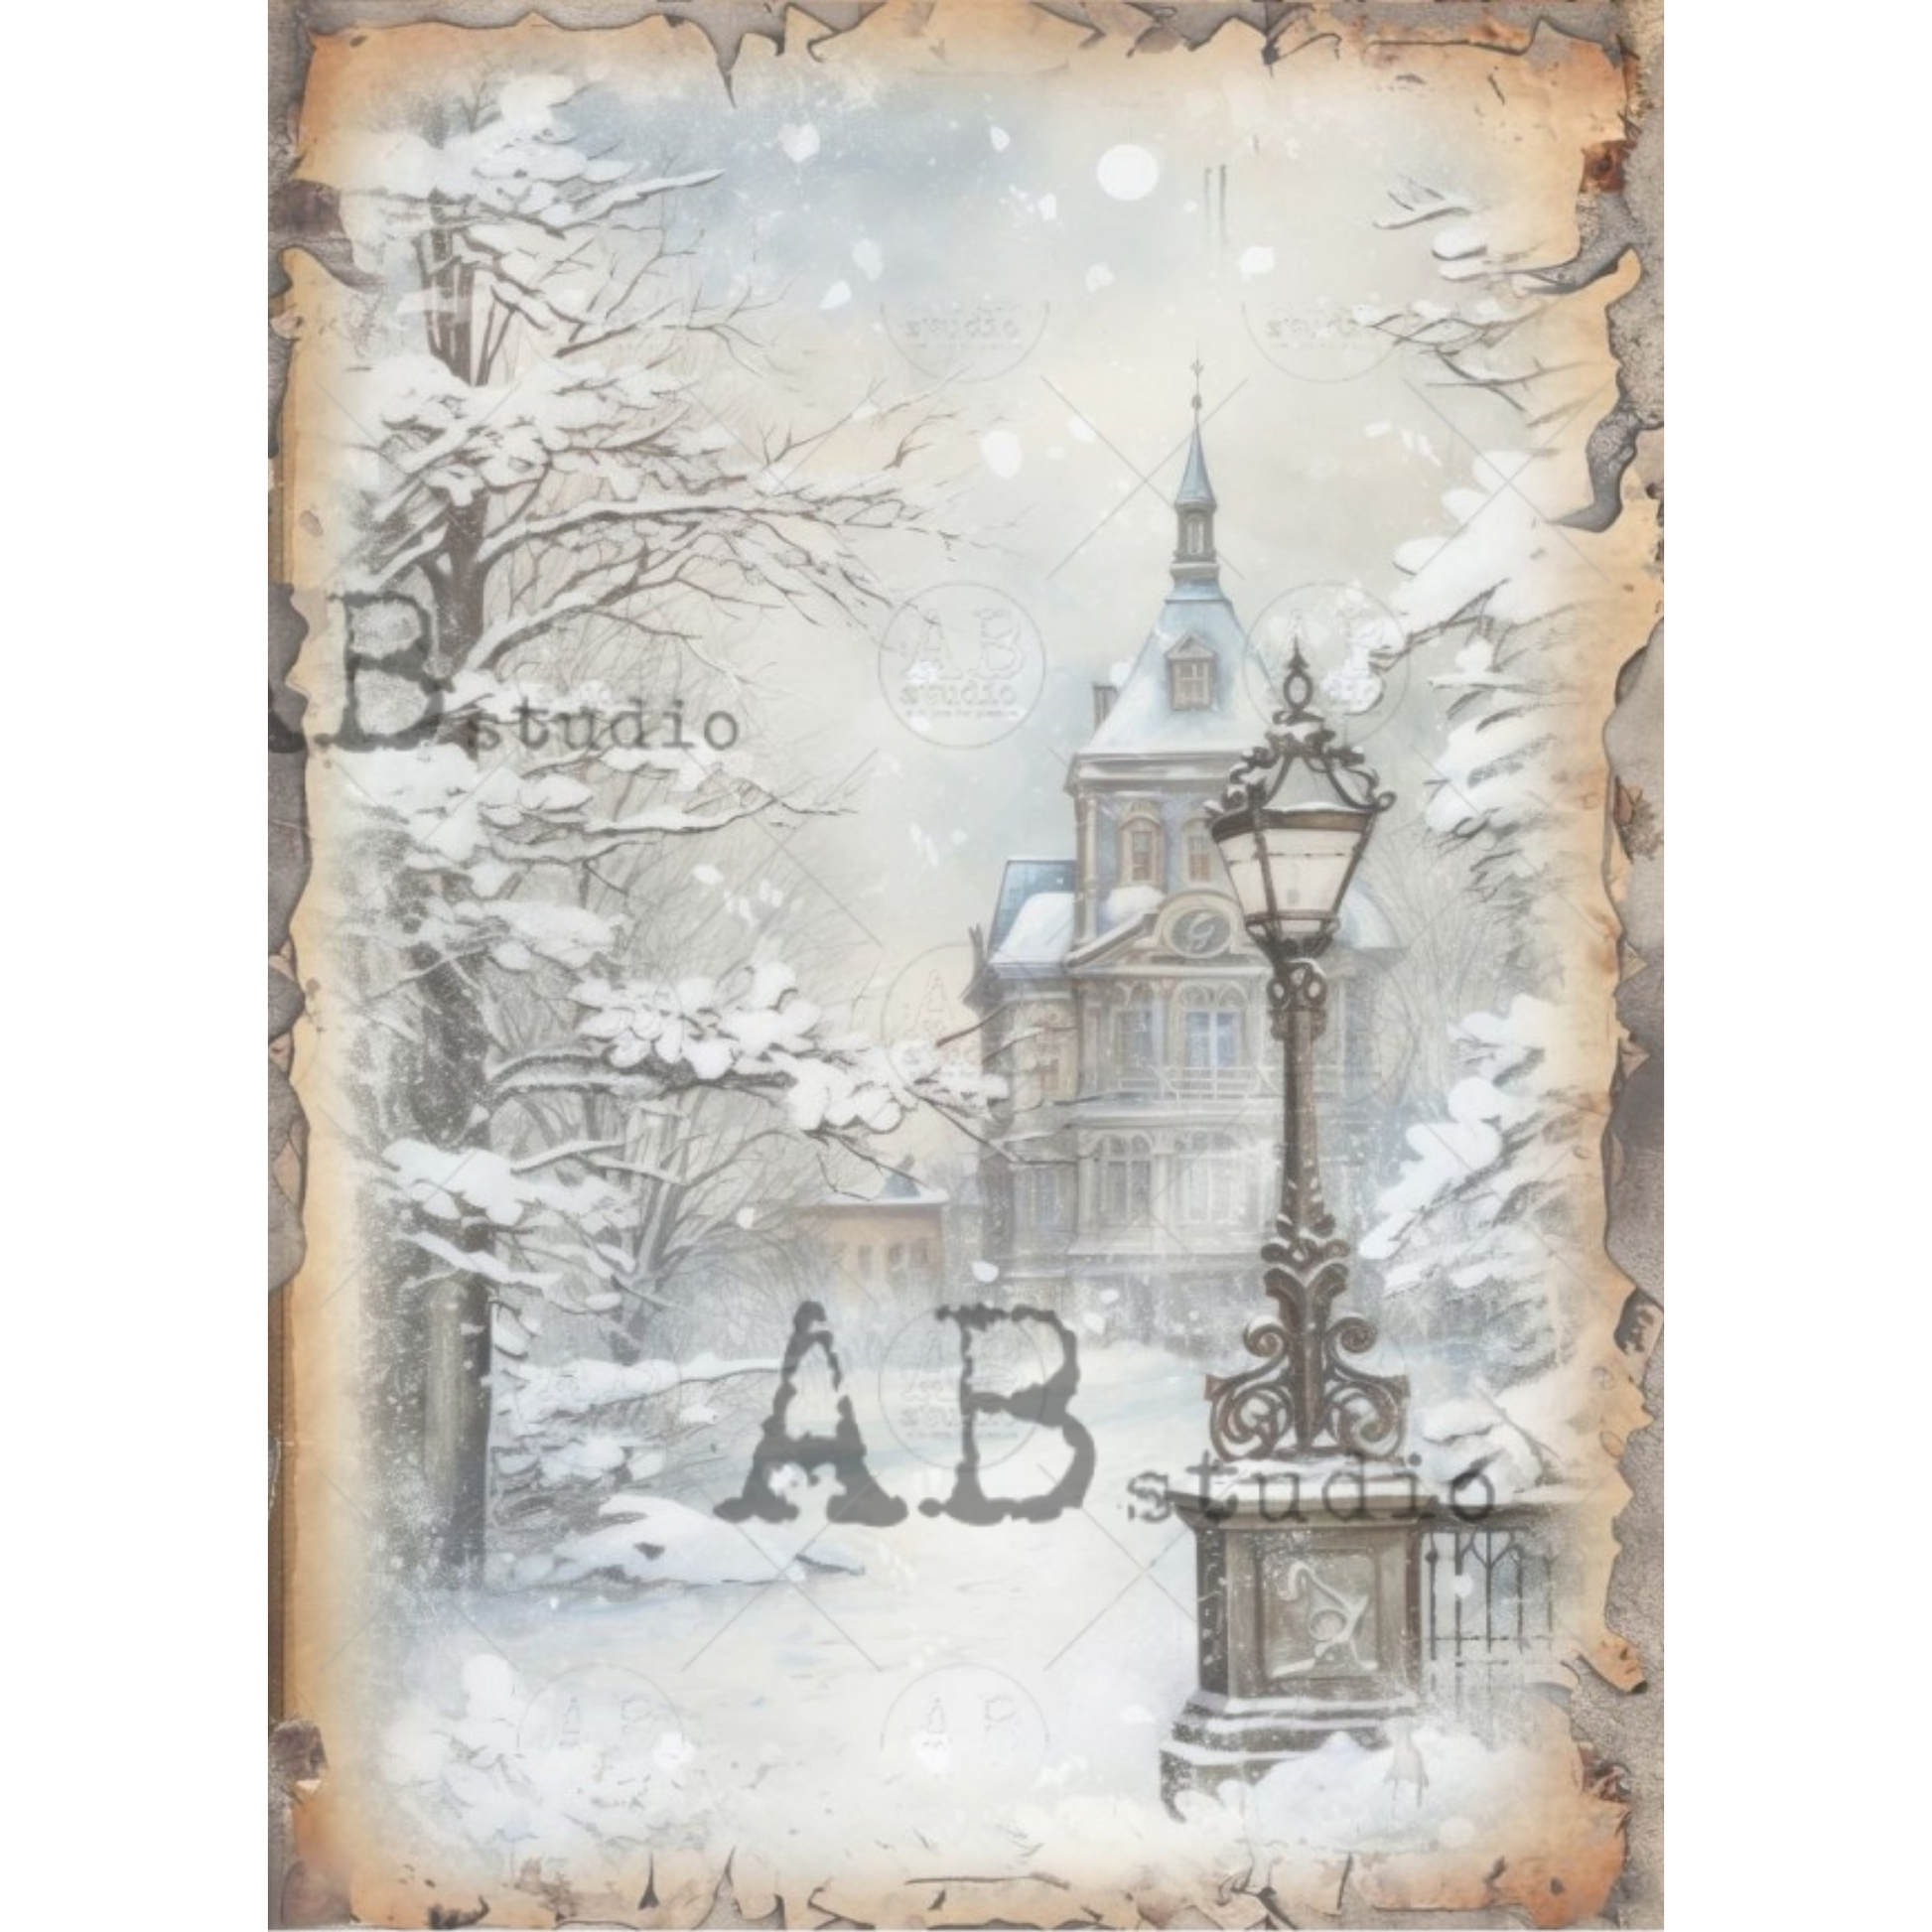 "Winter Streetscape" decoupage rice paper by AB Studio. Available at Milton's Daughter.